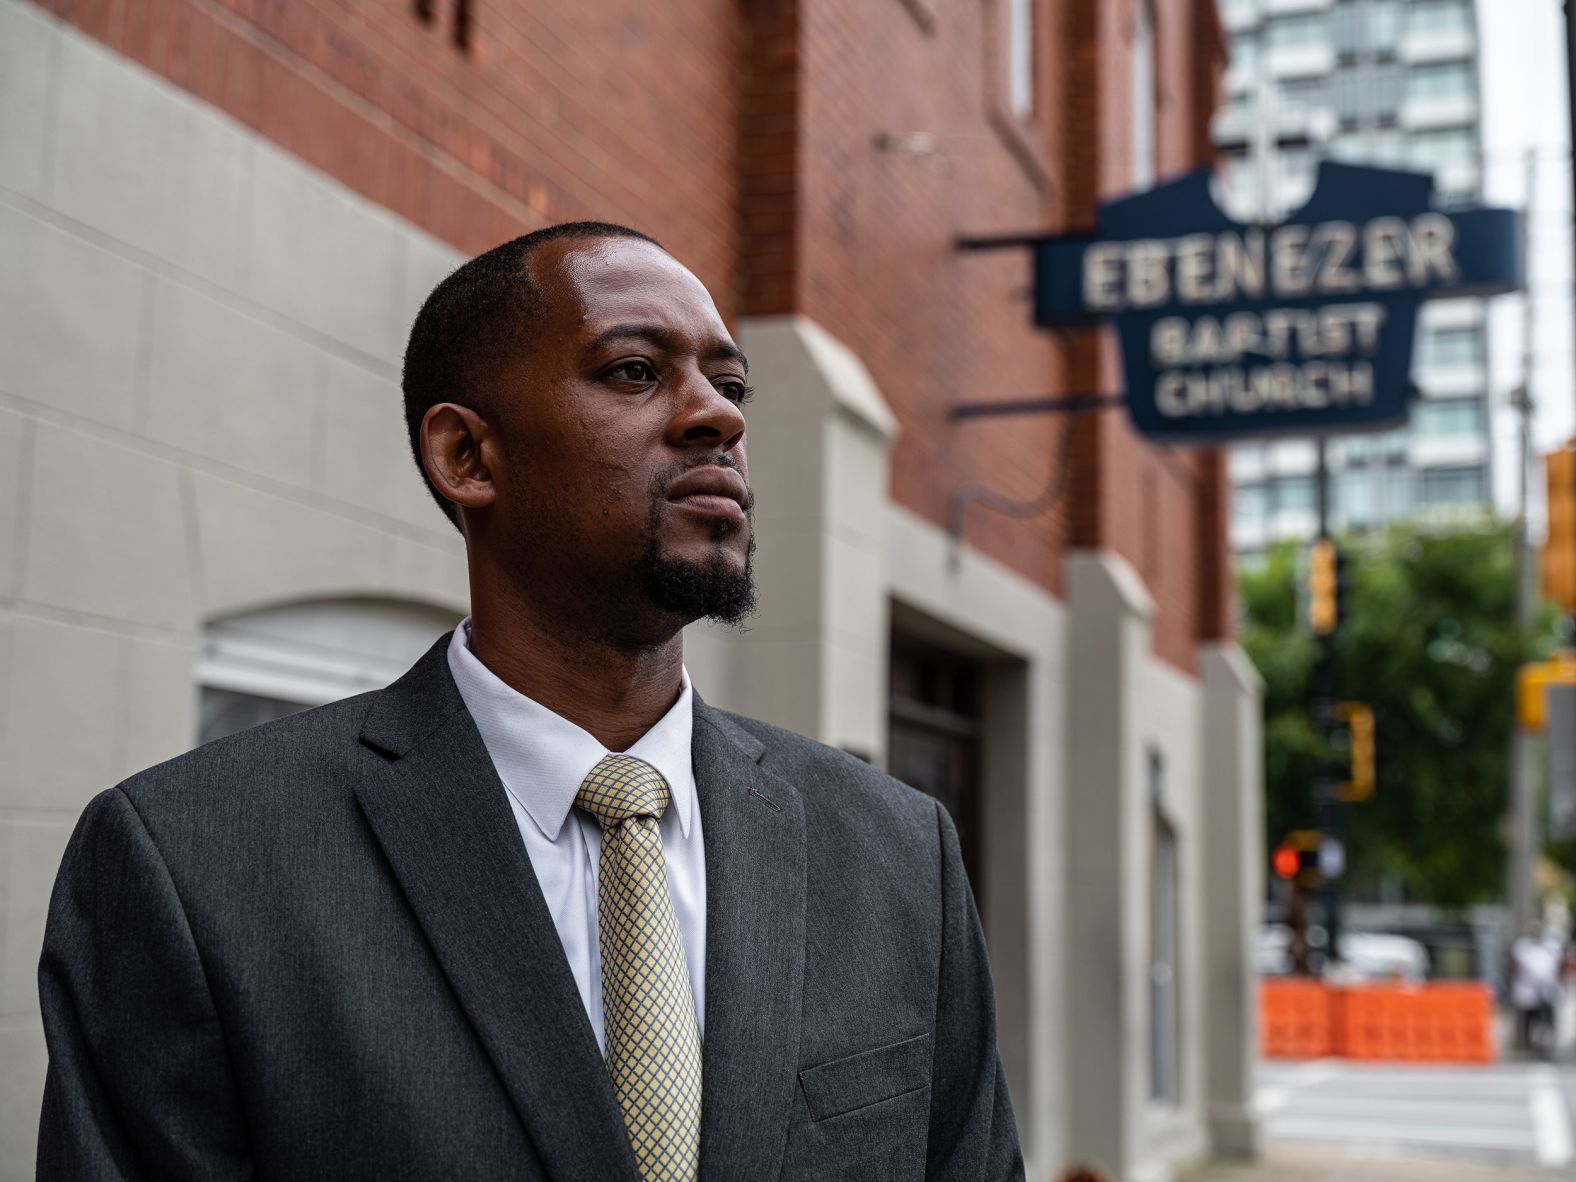 Antonio Lewis, a community organizer and friend of Brooks, stands outside Ebenezer Baptist Church on Tuesday. "Atlanta's had 40 years of strong black leadership. So if we can't fix the police brutality, if we can't fix what's going on with the justice system, it's kind of difficult to see it happening anywhere else in the world," he told McFadden. Lewis said it speaks volumes that Brooks' funeral was being held at the historic church. "This is a time. This is a moment. This is a big deal."